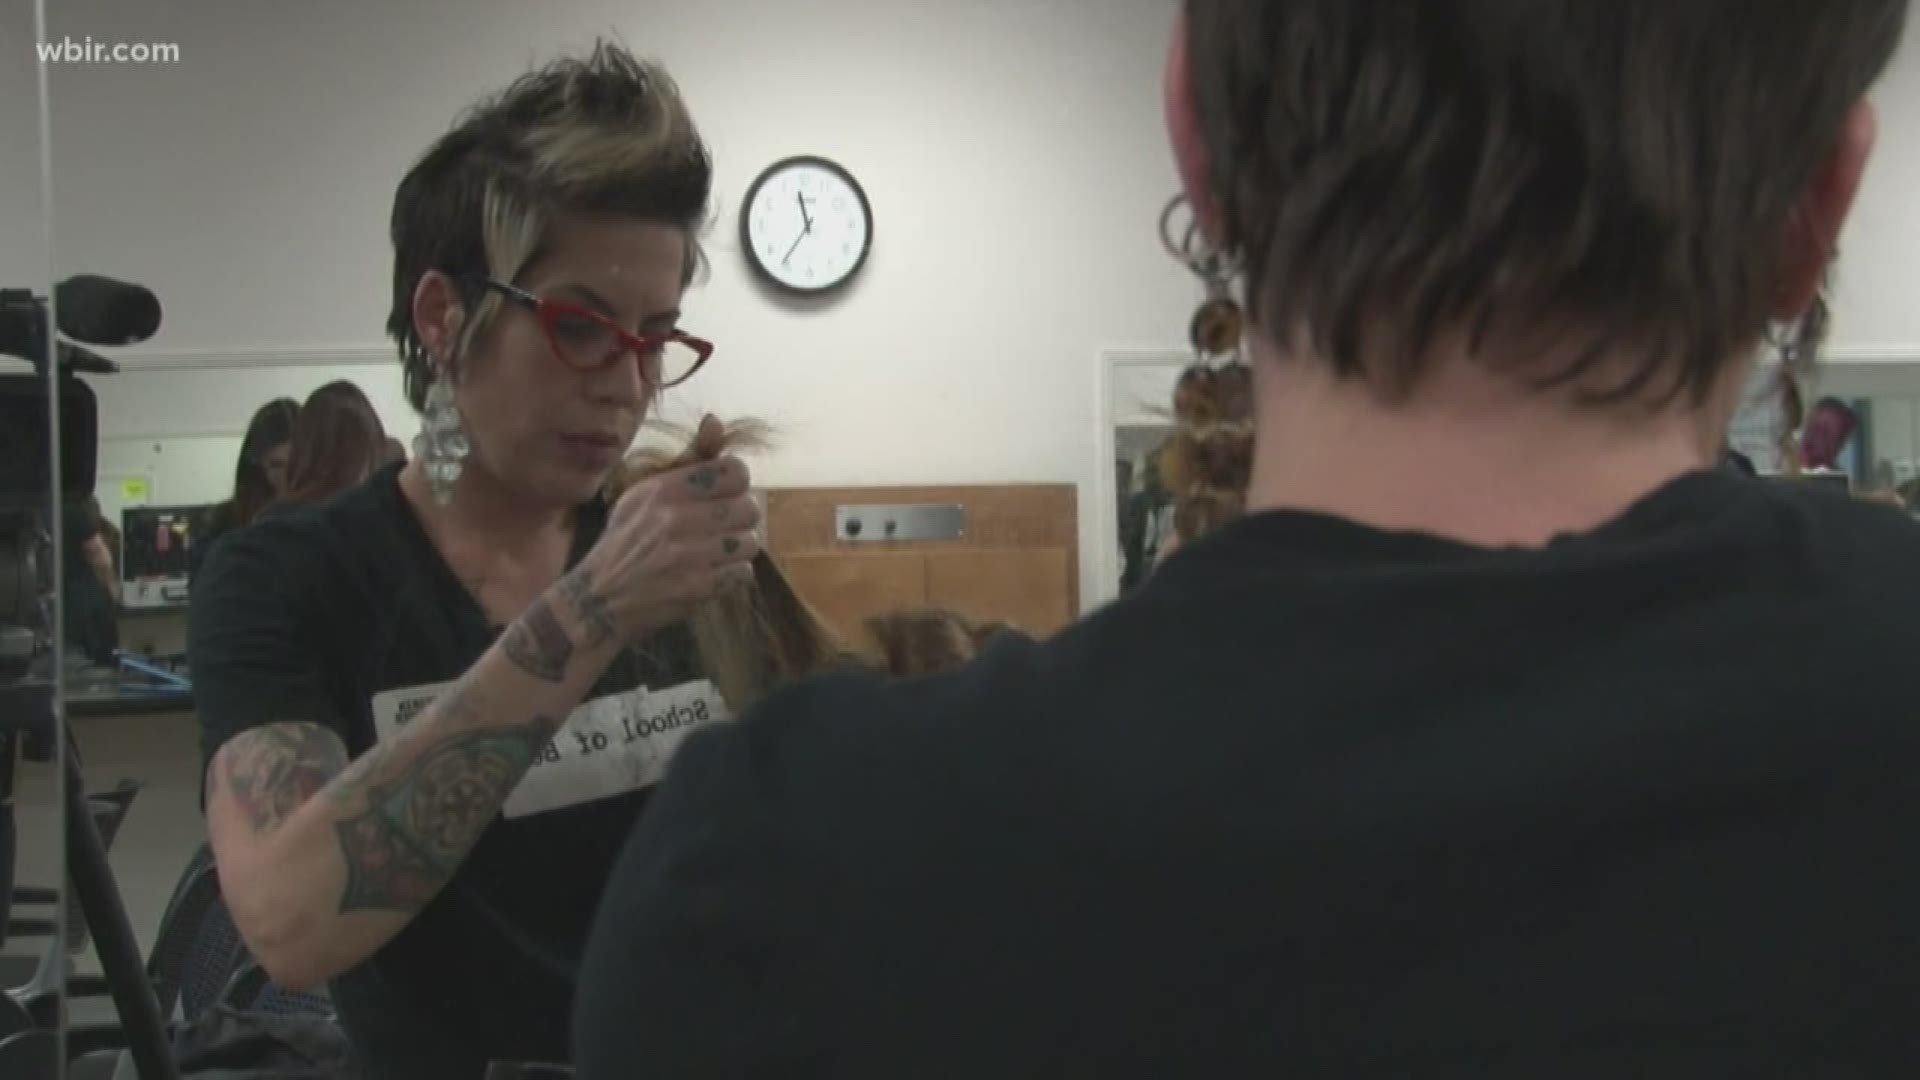 The bill would allow people to do certain jobs without a state-issued license. It covers professions from contractors to locksmiths to auctioneers to tattoo artists.